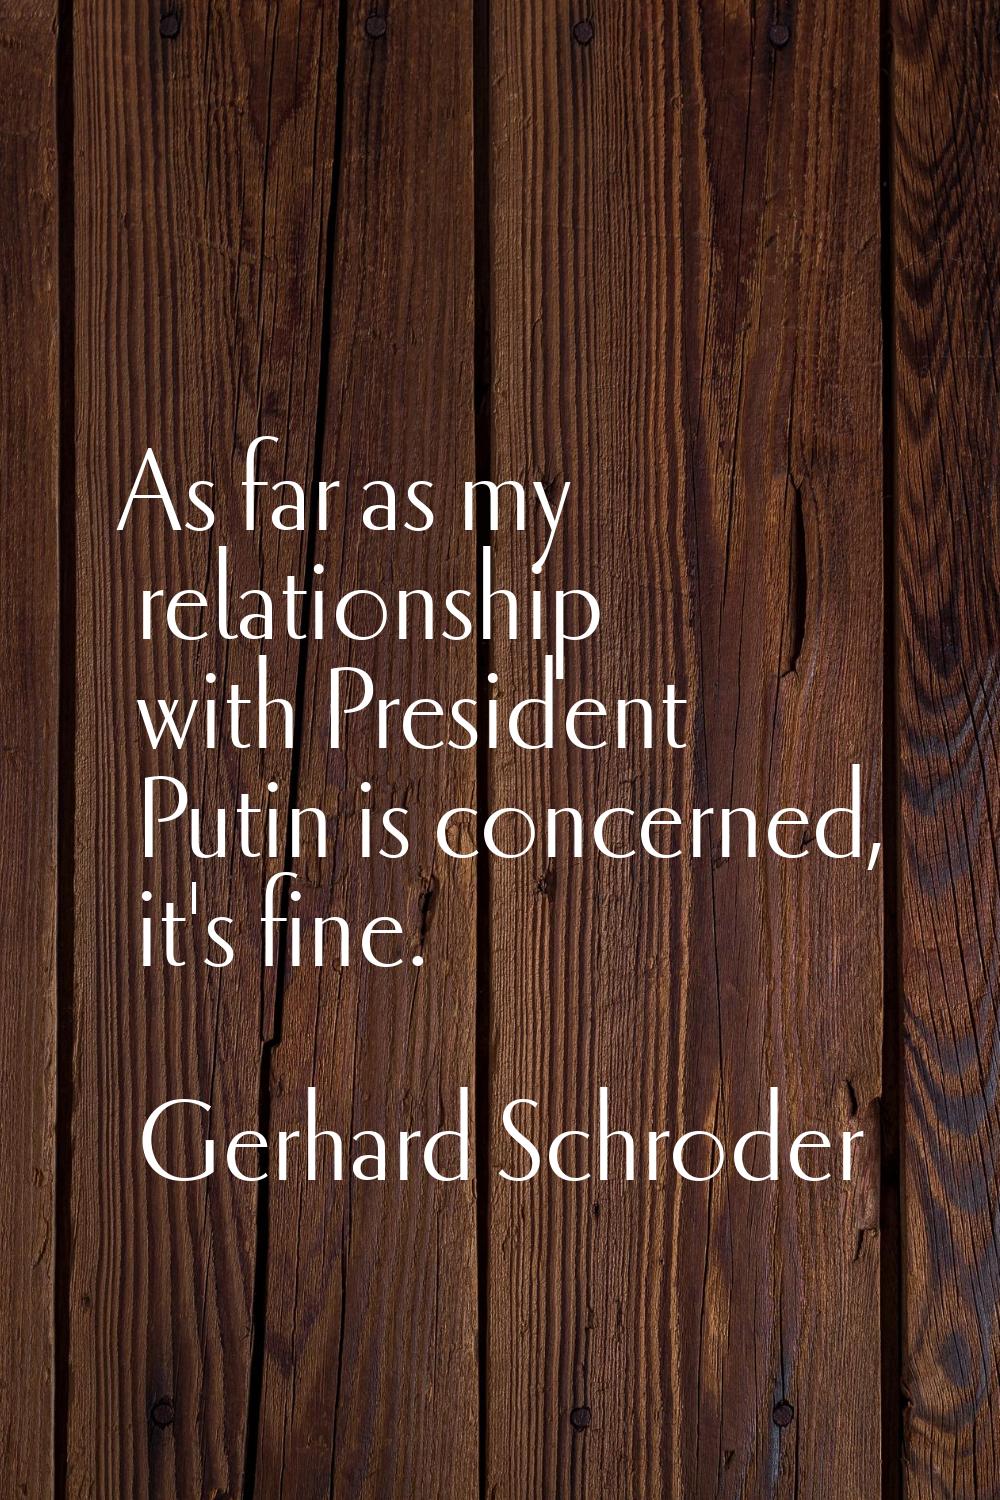 As far as my relationship with President Putin is concerned, it's fine.